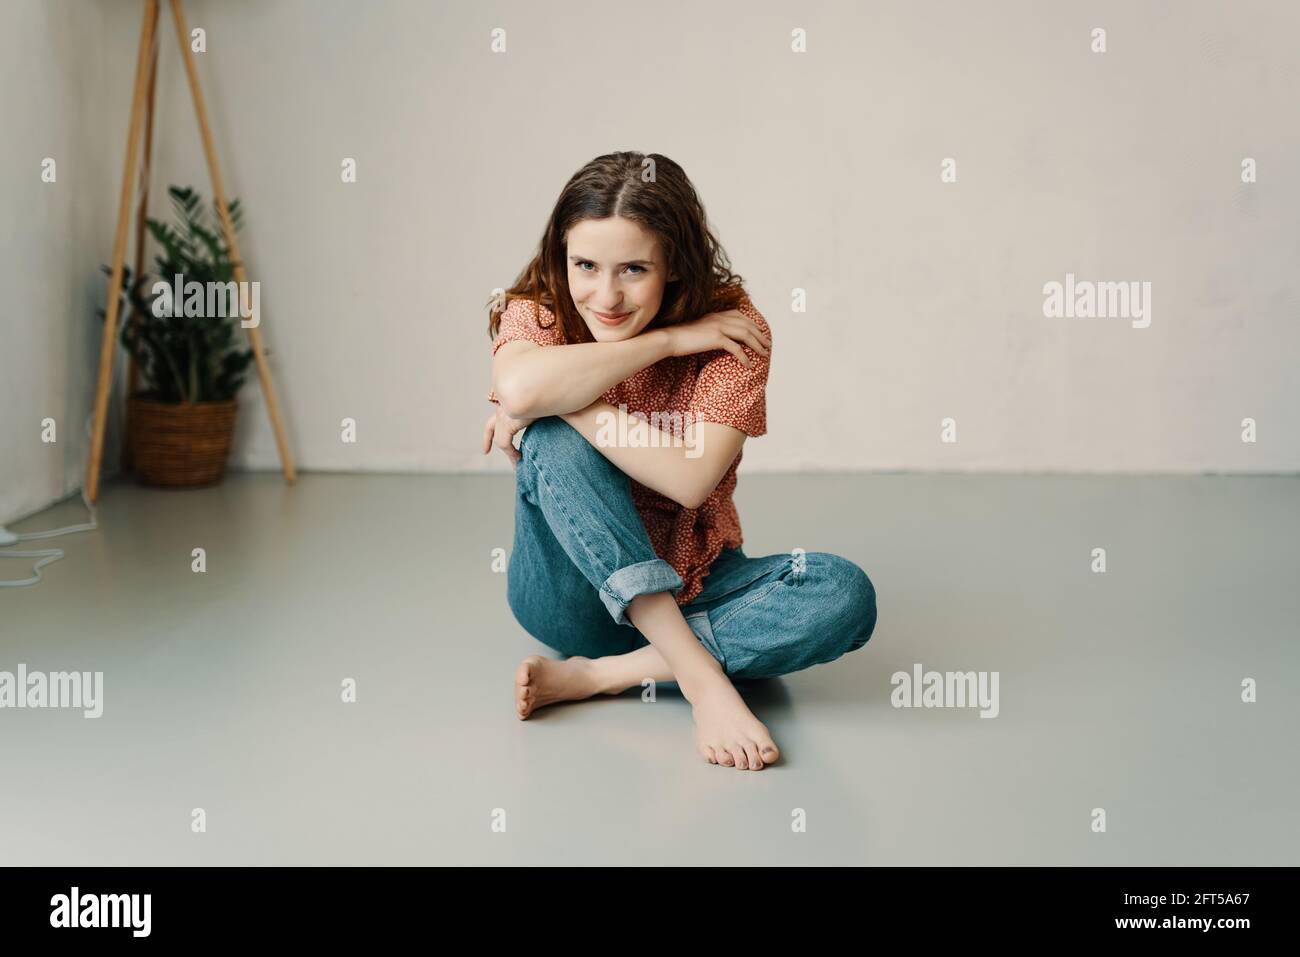 Pretty yung redhead woman relaxing barefoot on the floor with chin on hands looking at the camera with a sweet friendly smile and copyspace Stock Photo